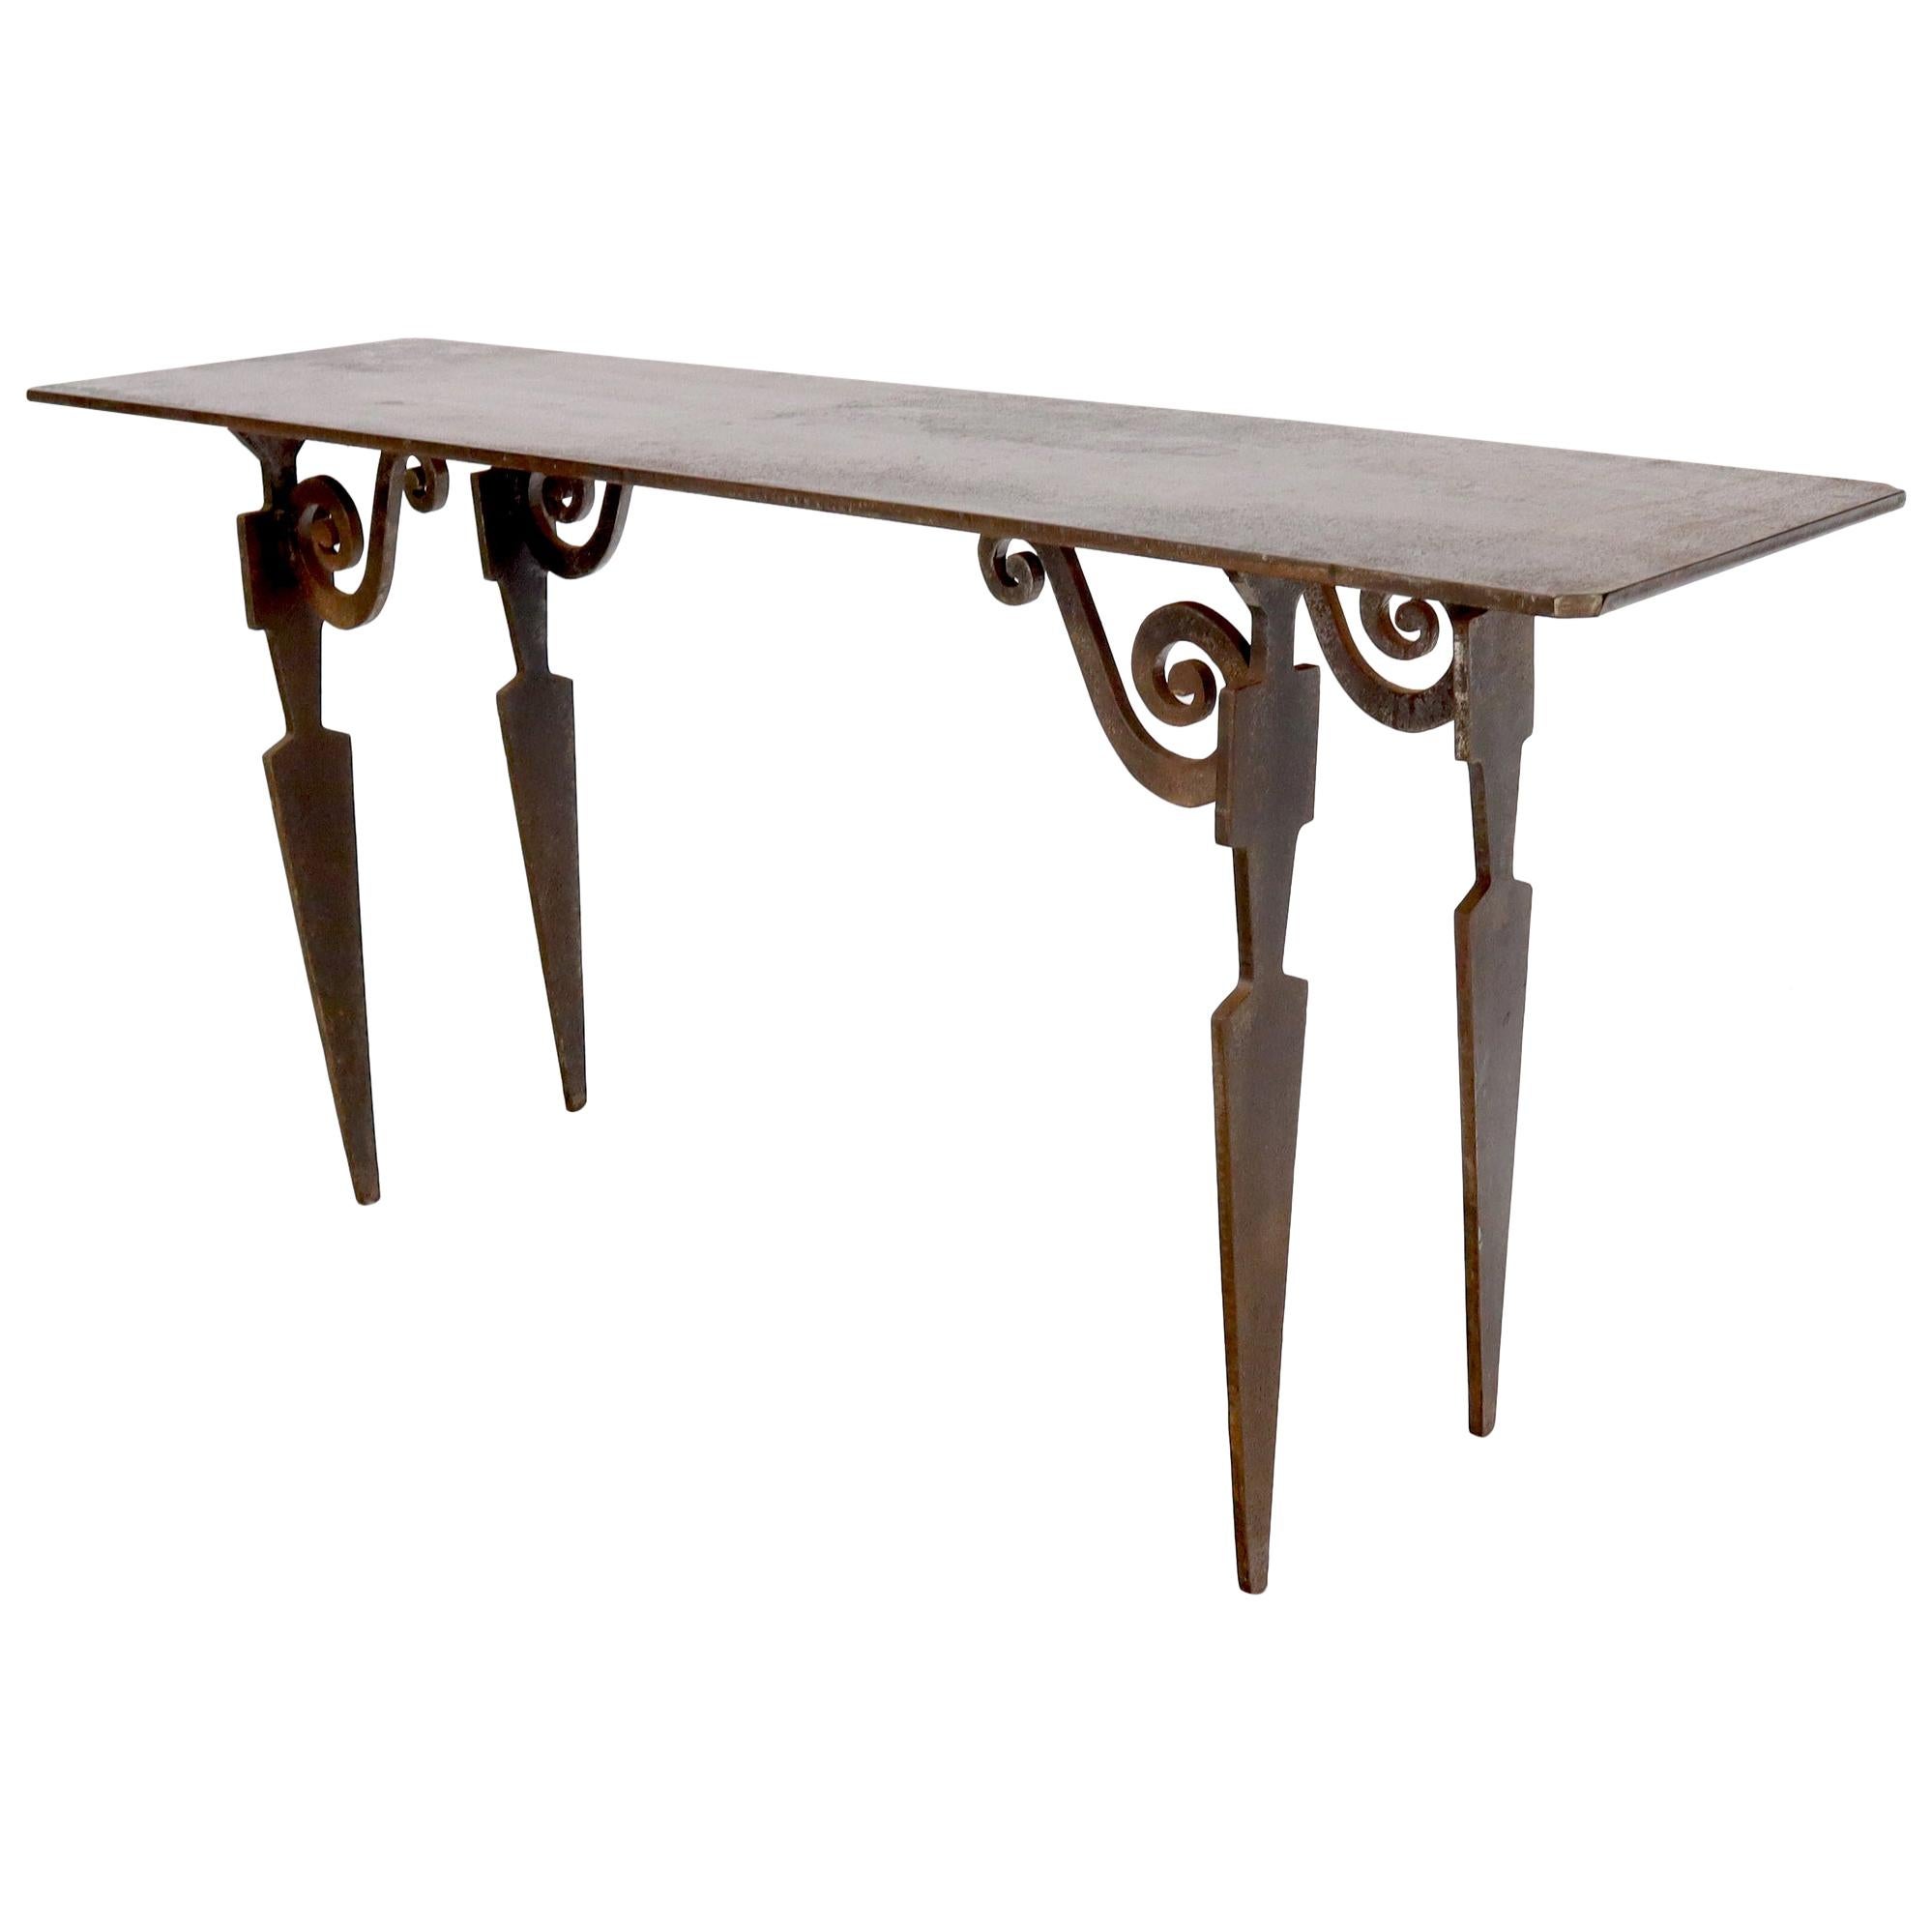 Thick Solid Steel Plate Top Cut Steel Legs Coffee Table Steam Punk Console Table